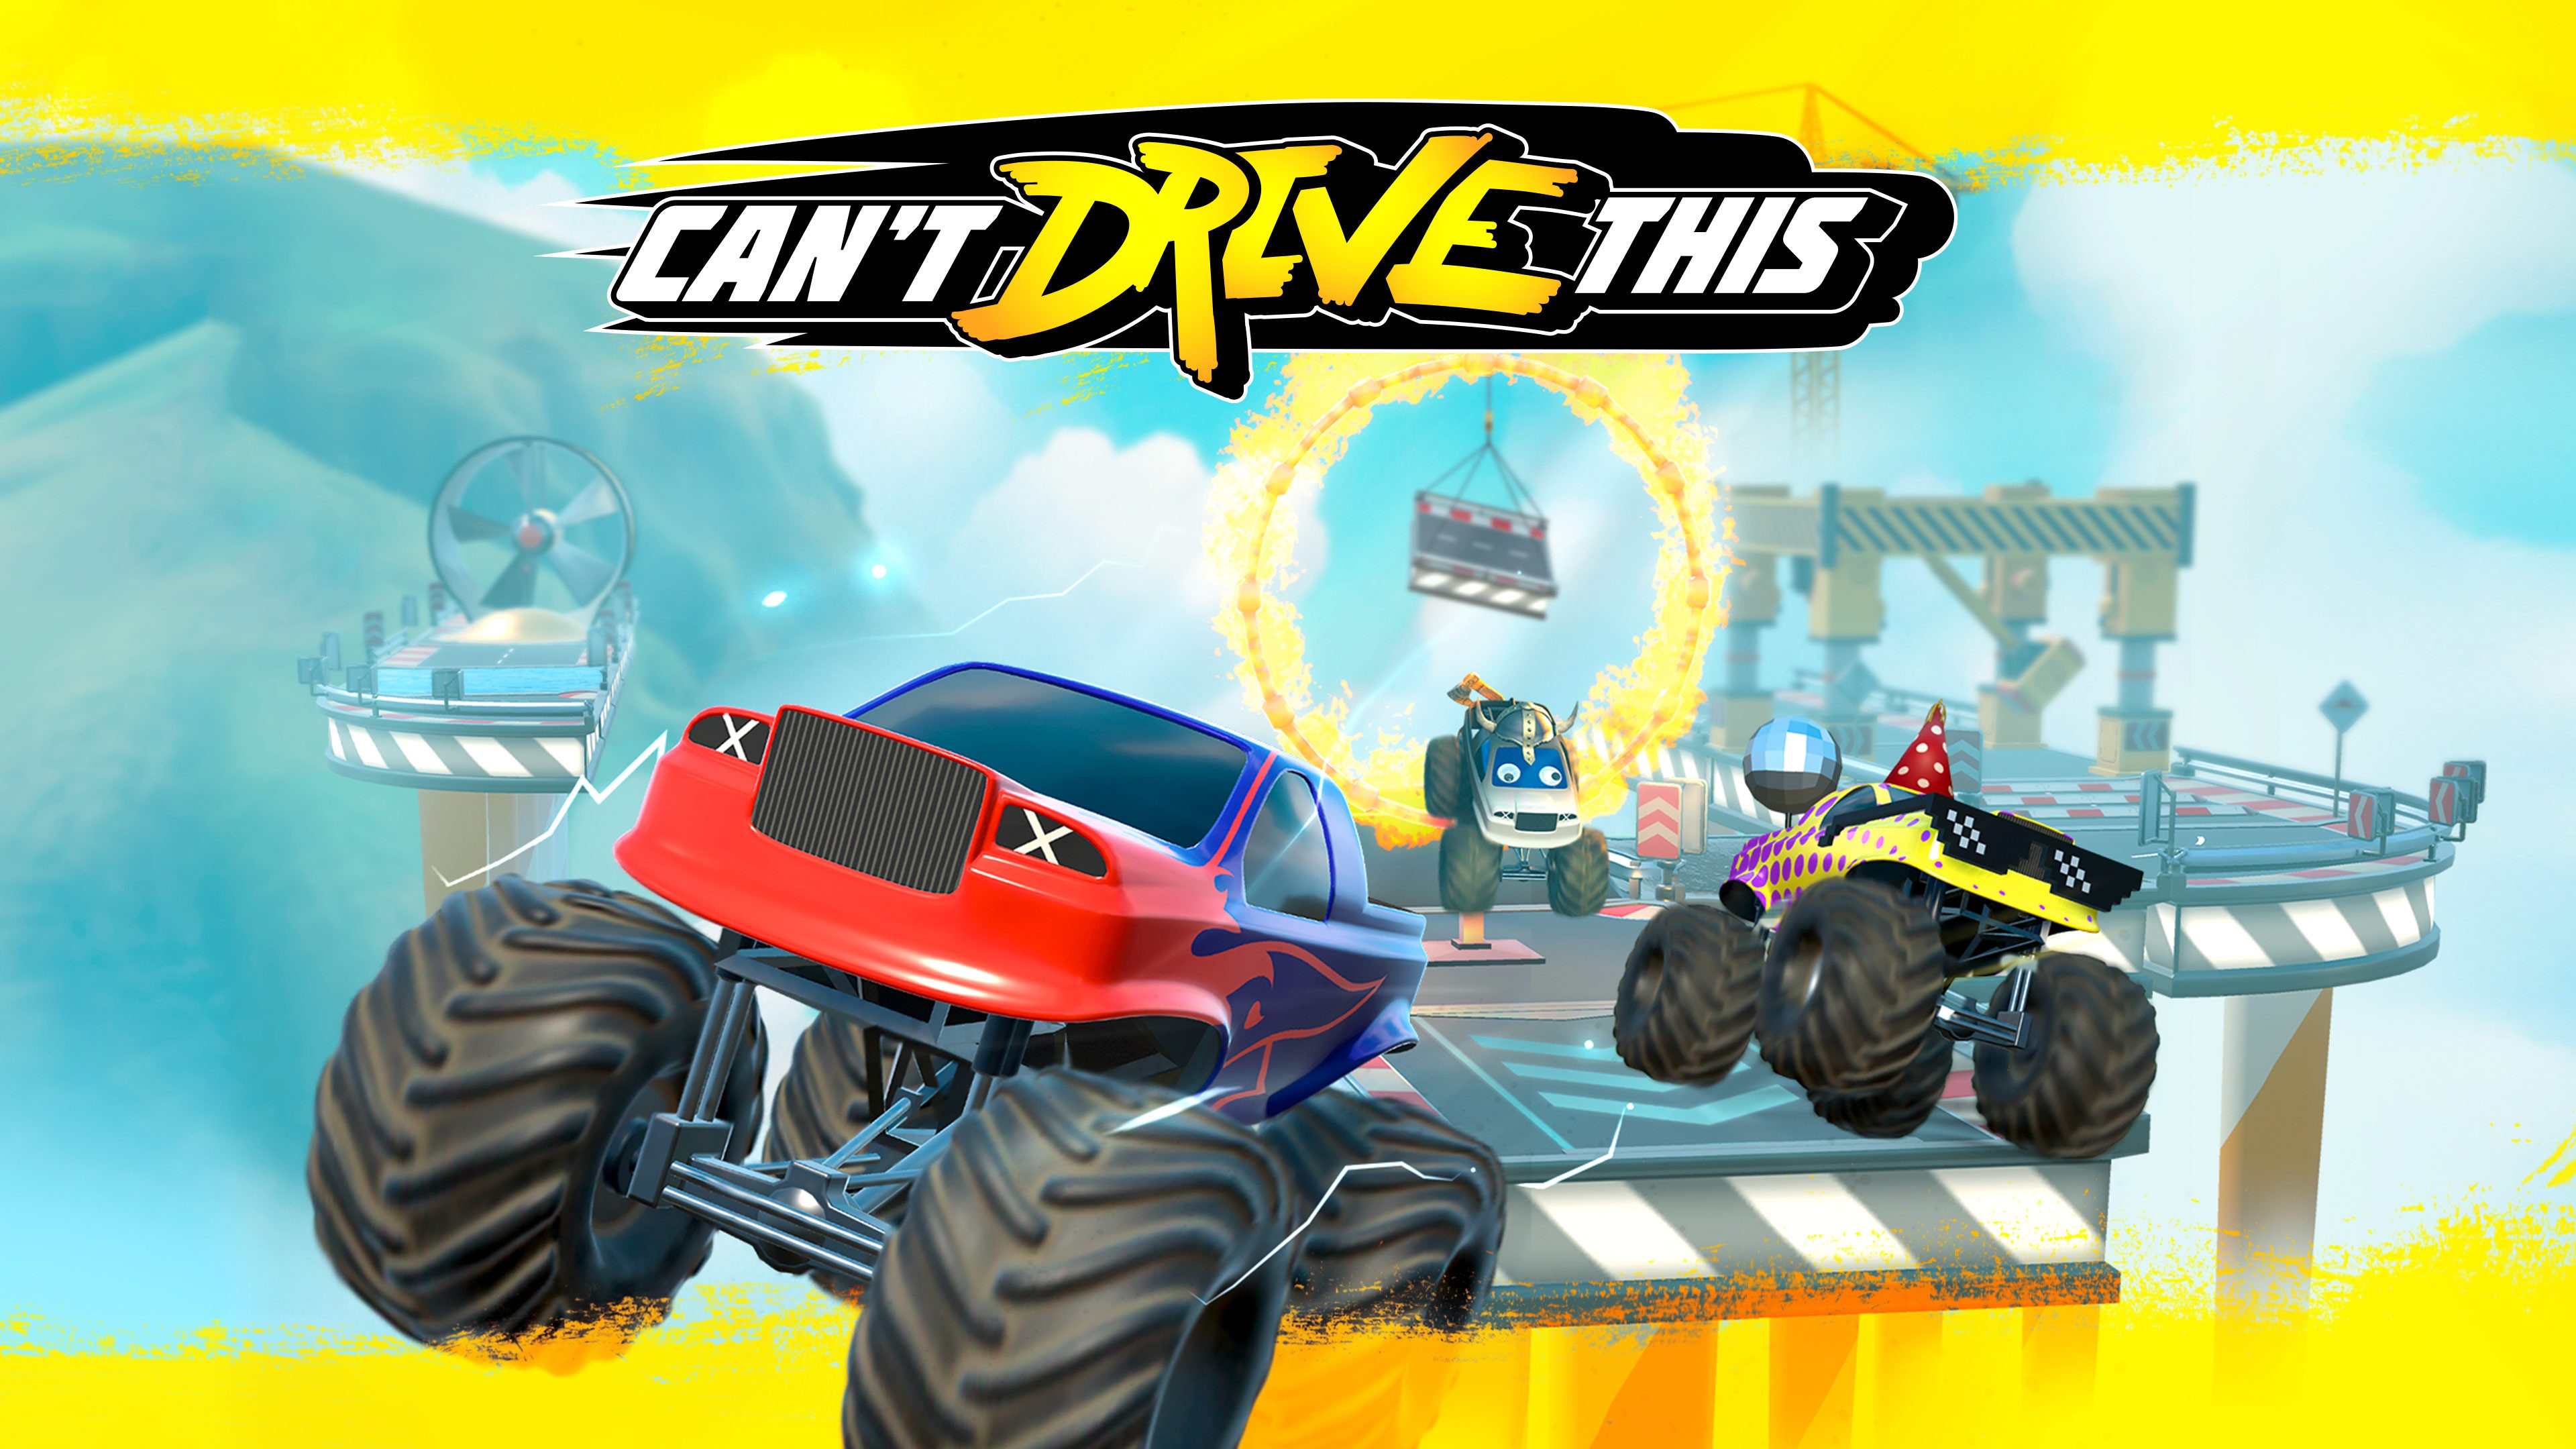 Video For Can’t Drive This Is Now Available For Digital Pre-order And Pre-download On Xbox One And Xbox Series X|S